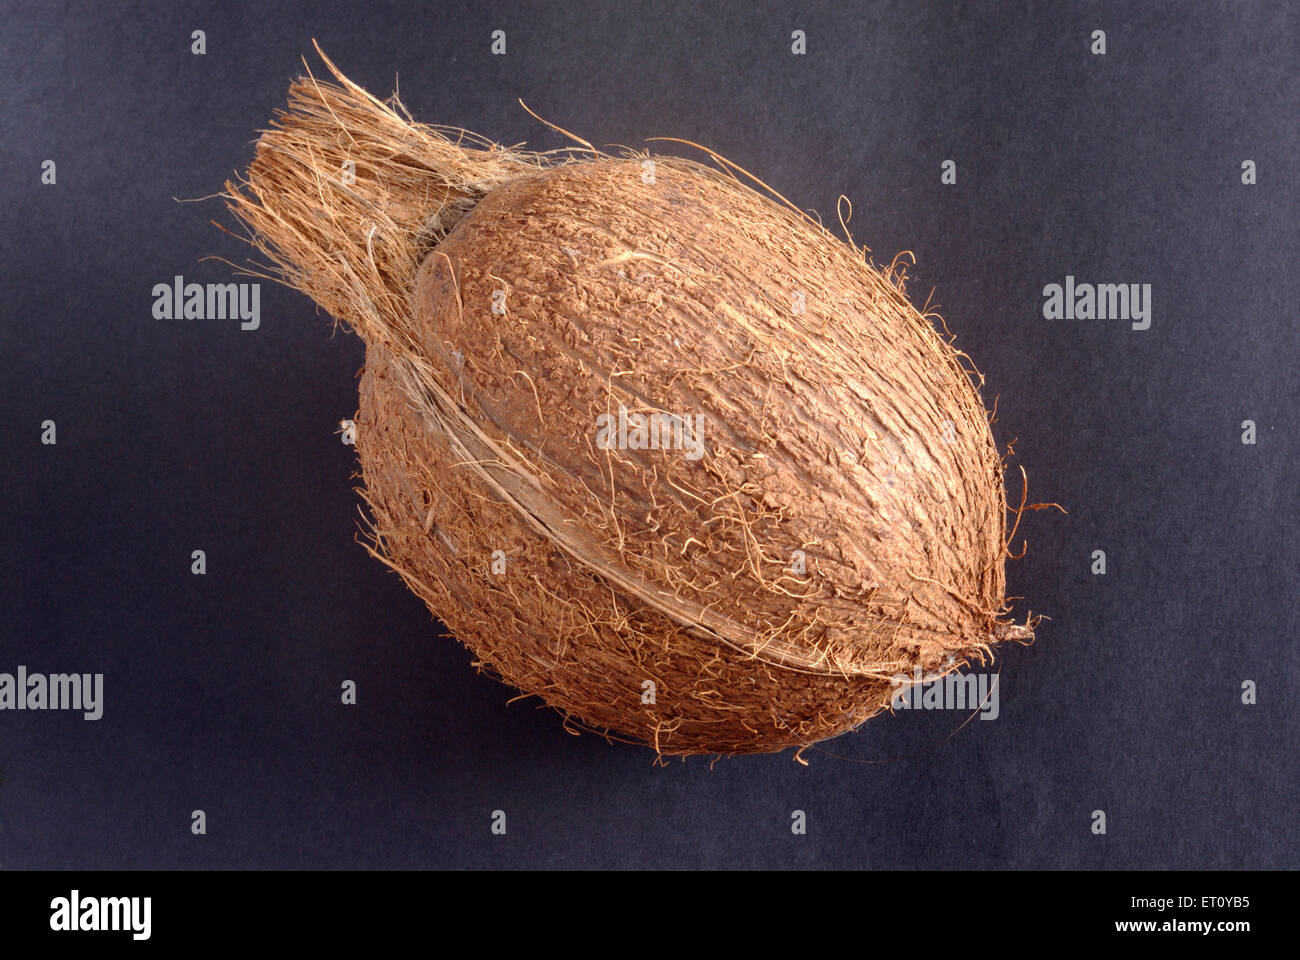 coconut shell on black background Stock Photo